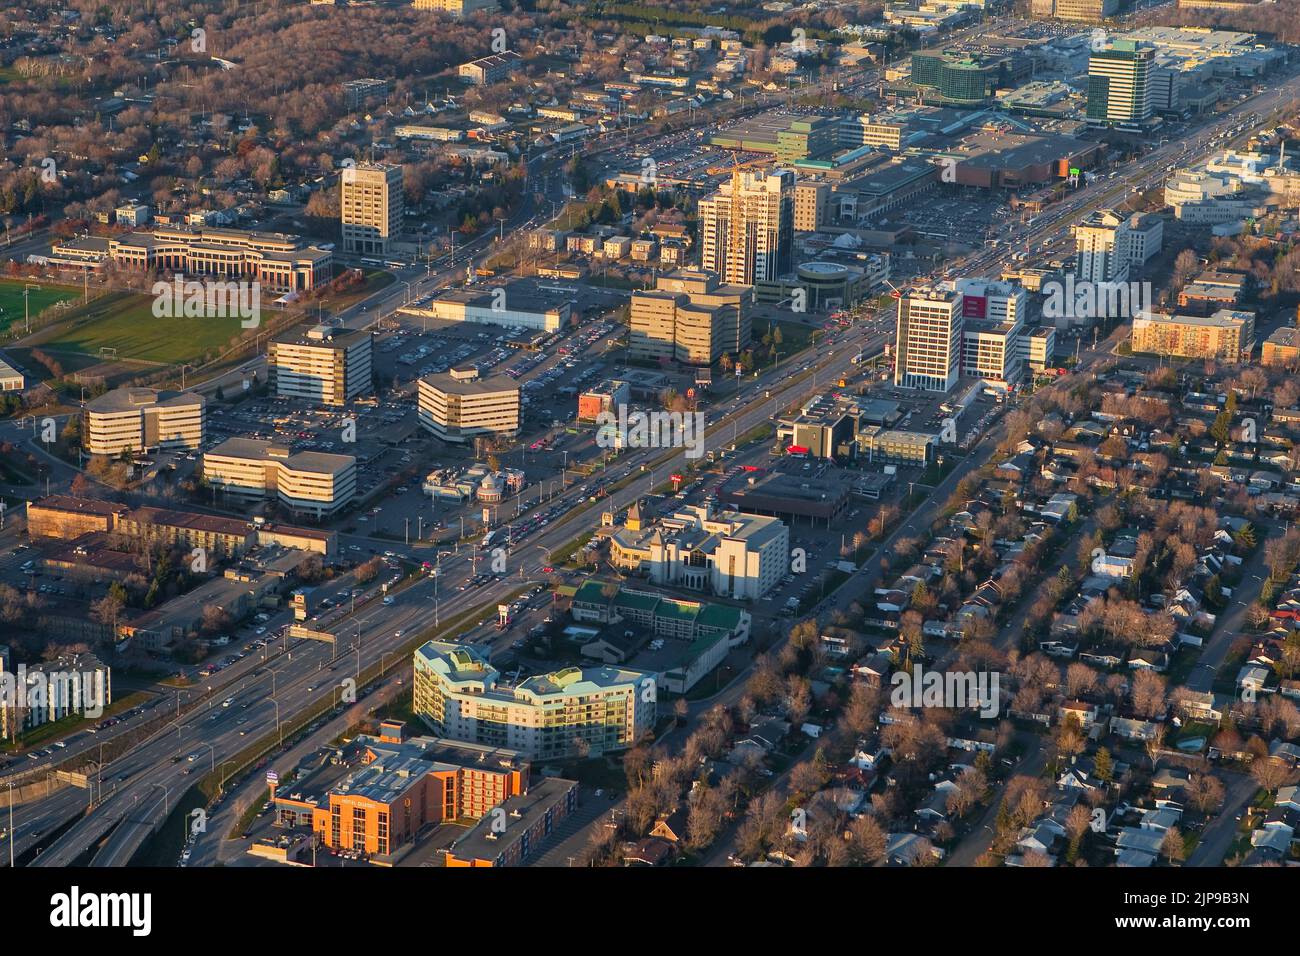 The Ste-Foy distric downtown in Quebec city is pictured in this aerial photo November 11, 2009. In this picture can be seen the Boulevard Laurier, the complexe Jules-Dallaire, Place Laurier Shopping mall, Tour Cominar tower, Place de La Cite, Complexe Delta and Place Ste-Foy. Stock Photo